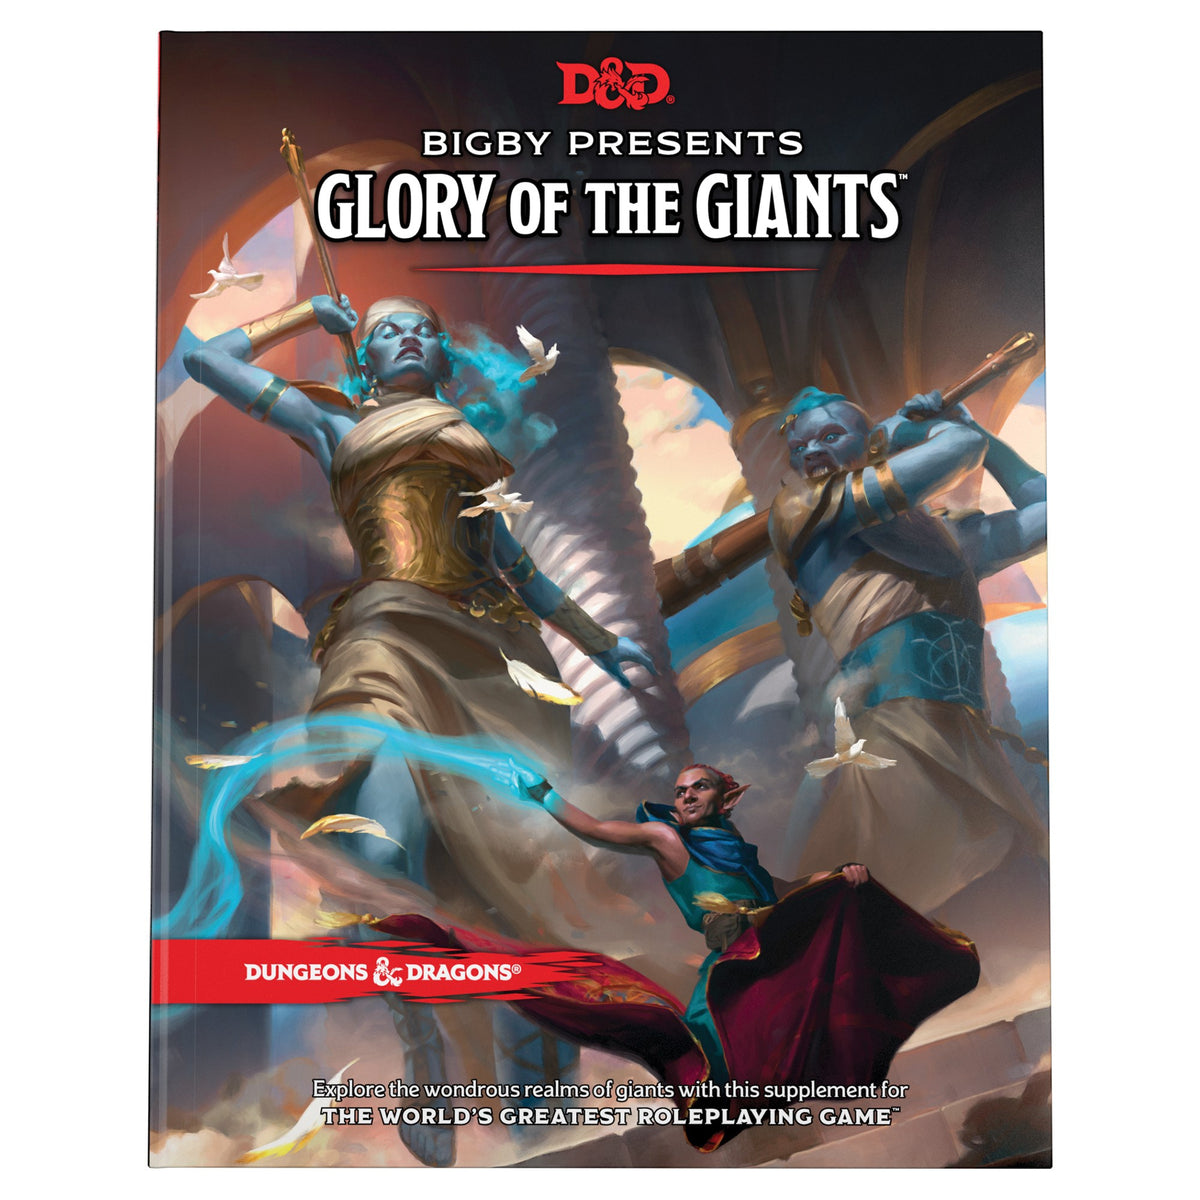 Dungeons and Dragons Bigby Presents Glory of the Giants